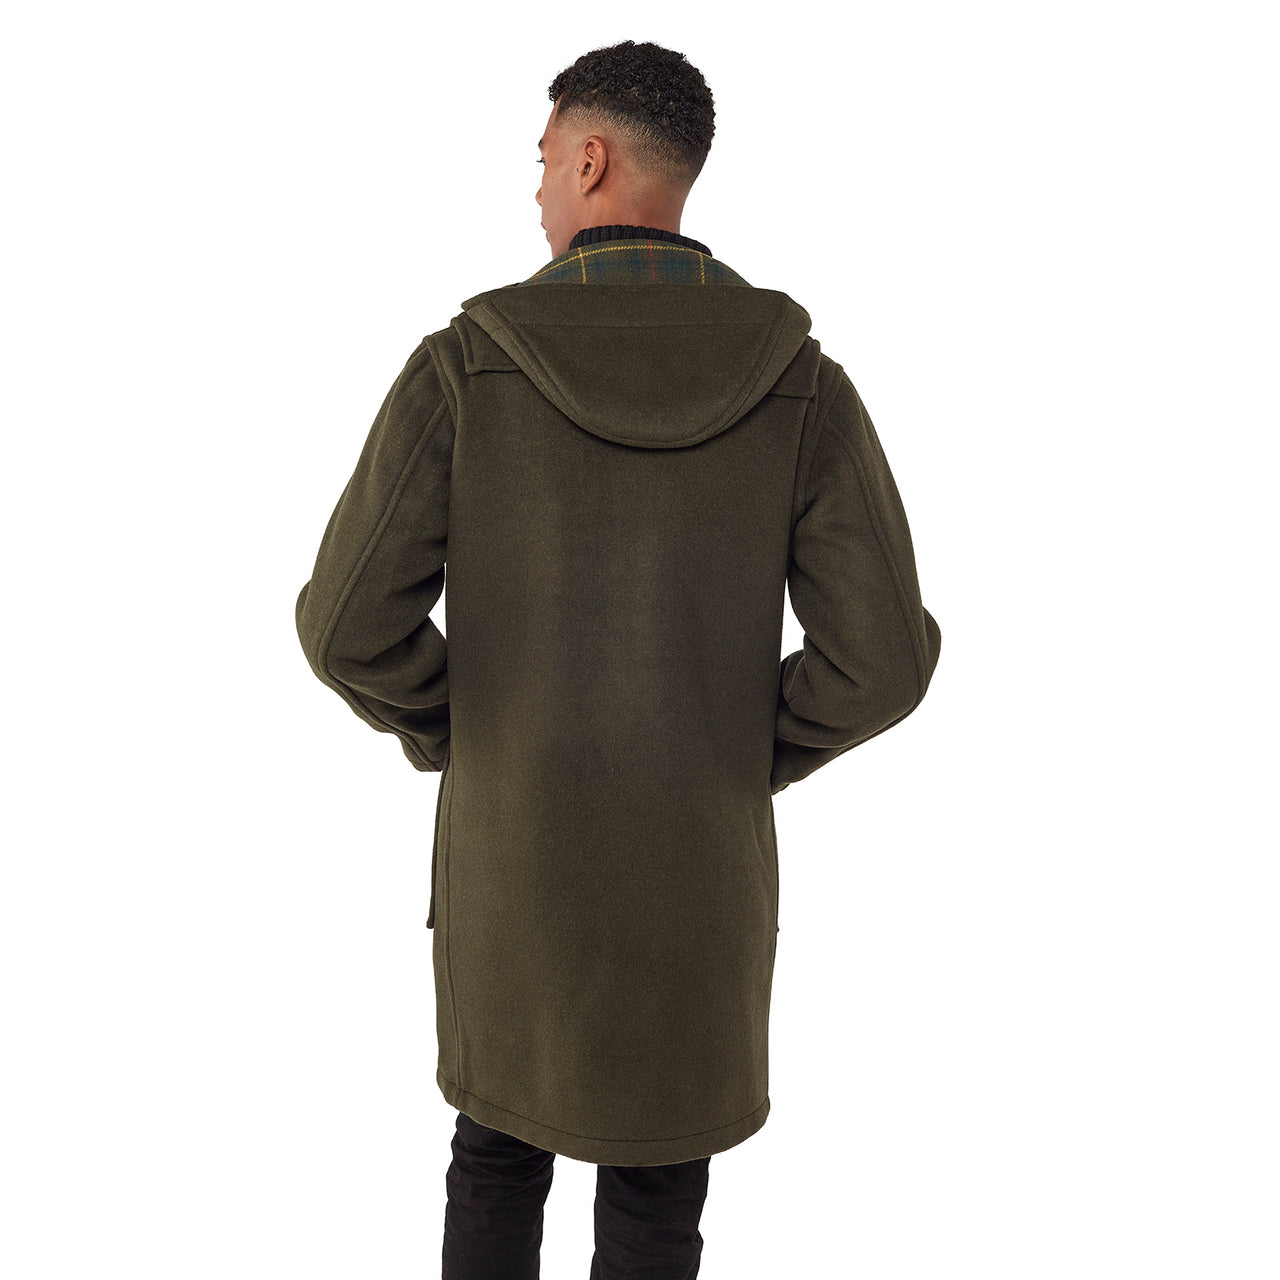 Mens Olive Classic Fit Original And Authentic Duffle Coat With Horn Toggles